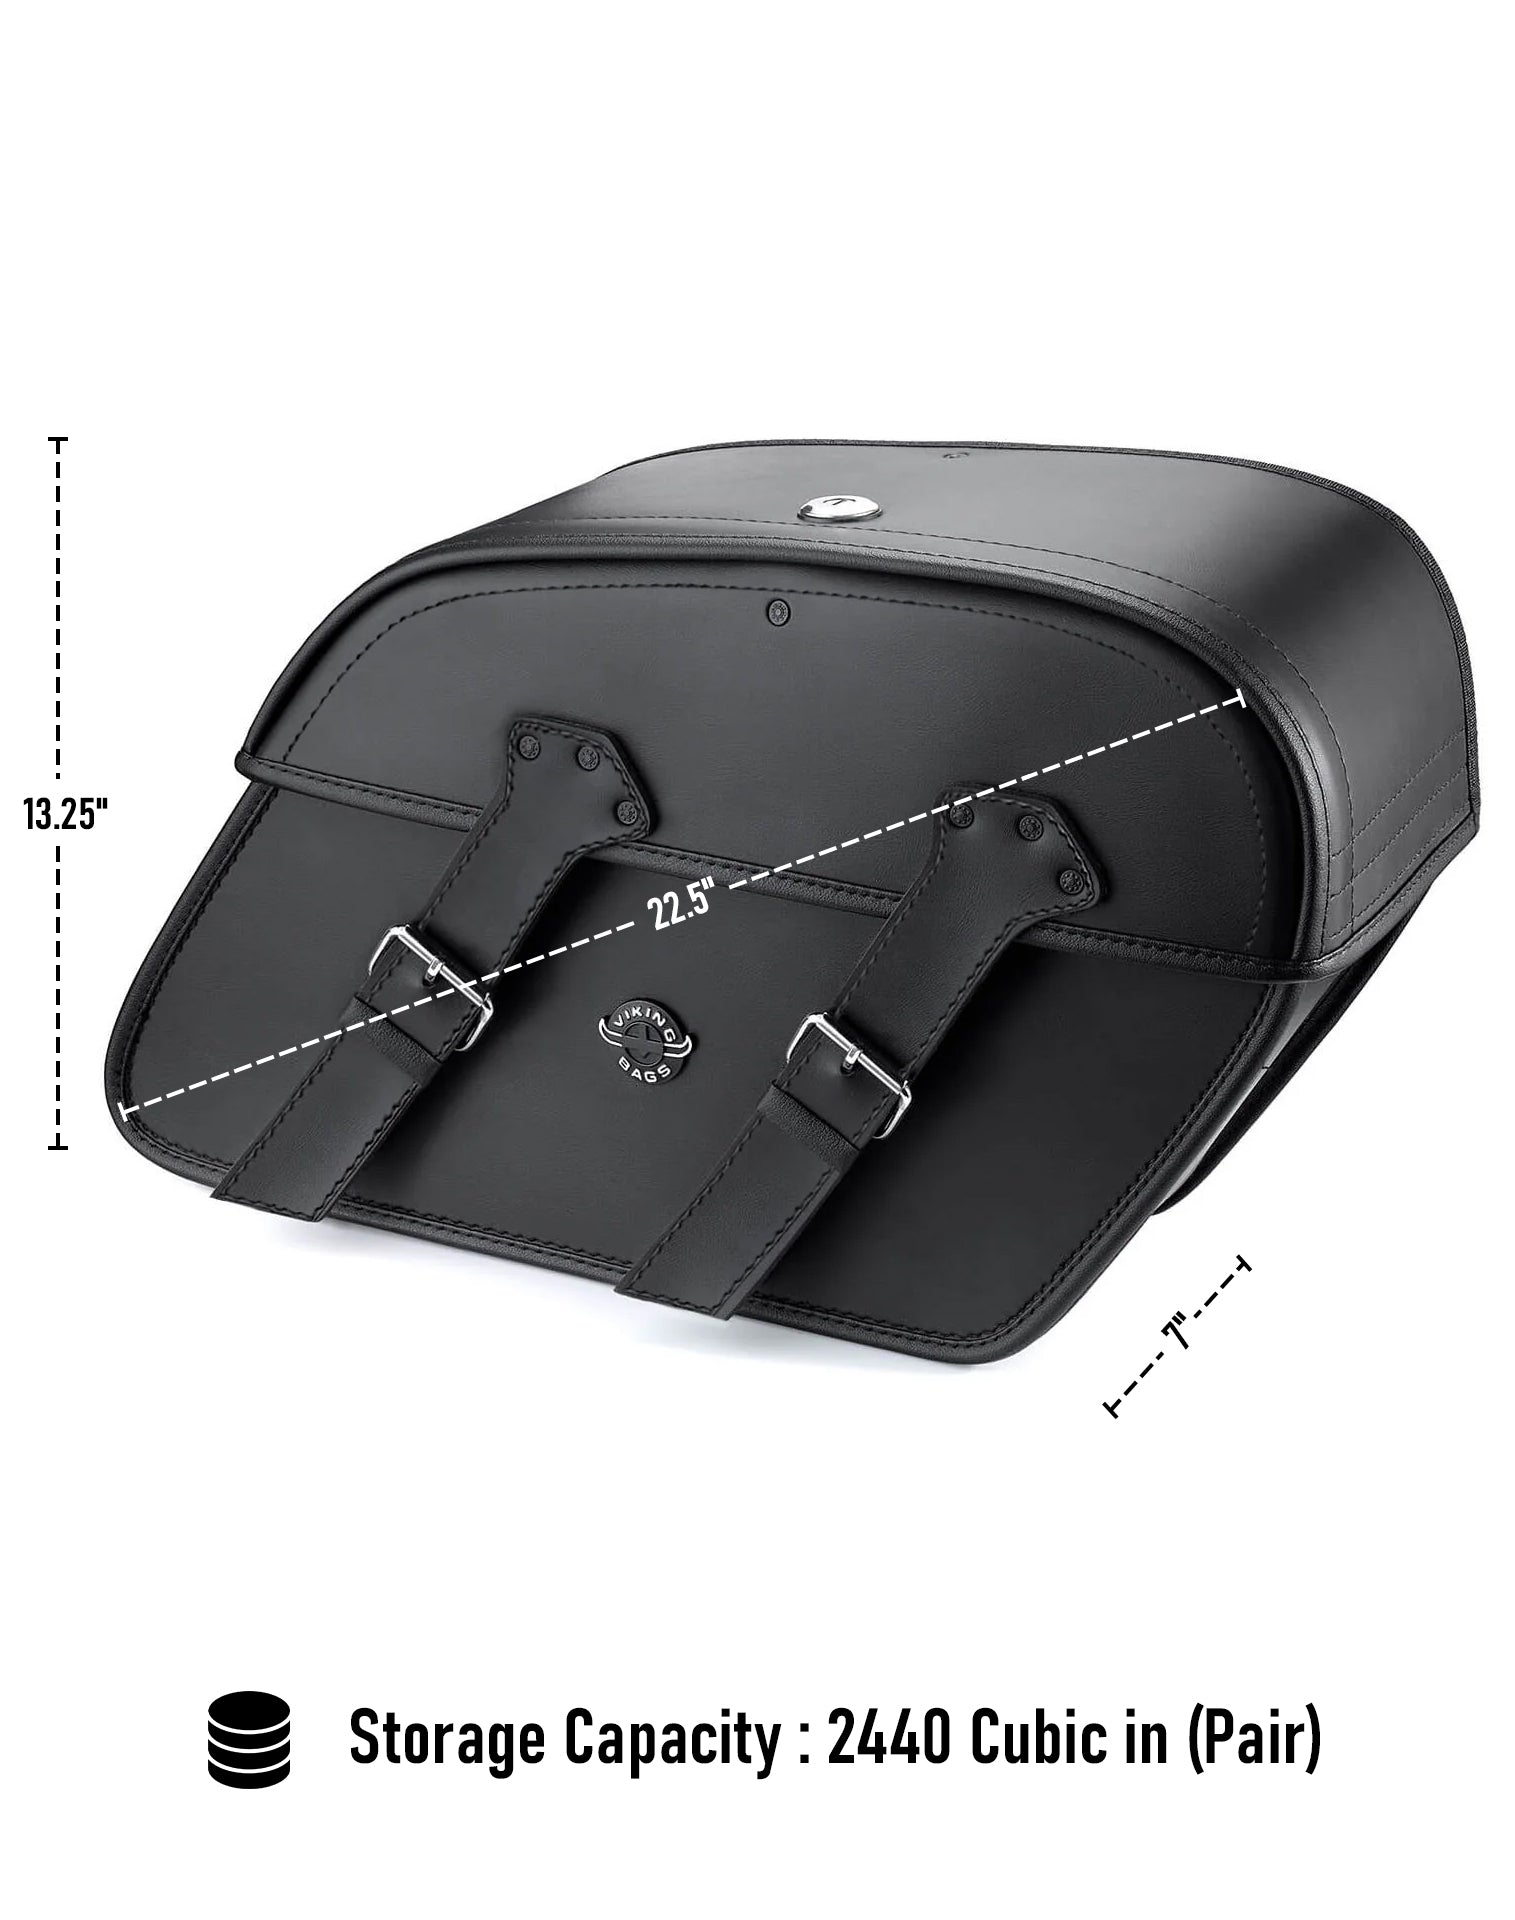 Viking Raven Extra Large Hyosung Aquila Gv 250 Leather Motorcycle Saddlebags Can Store Your Ridings Gears